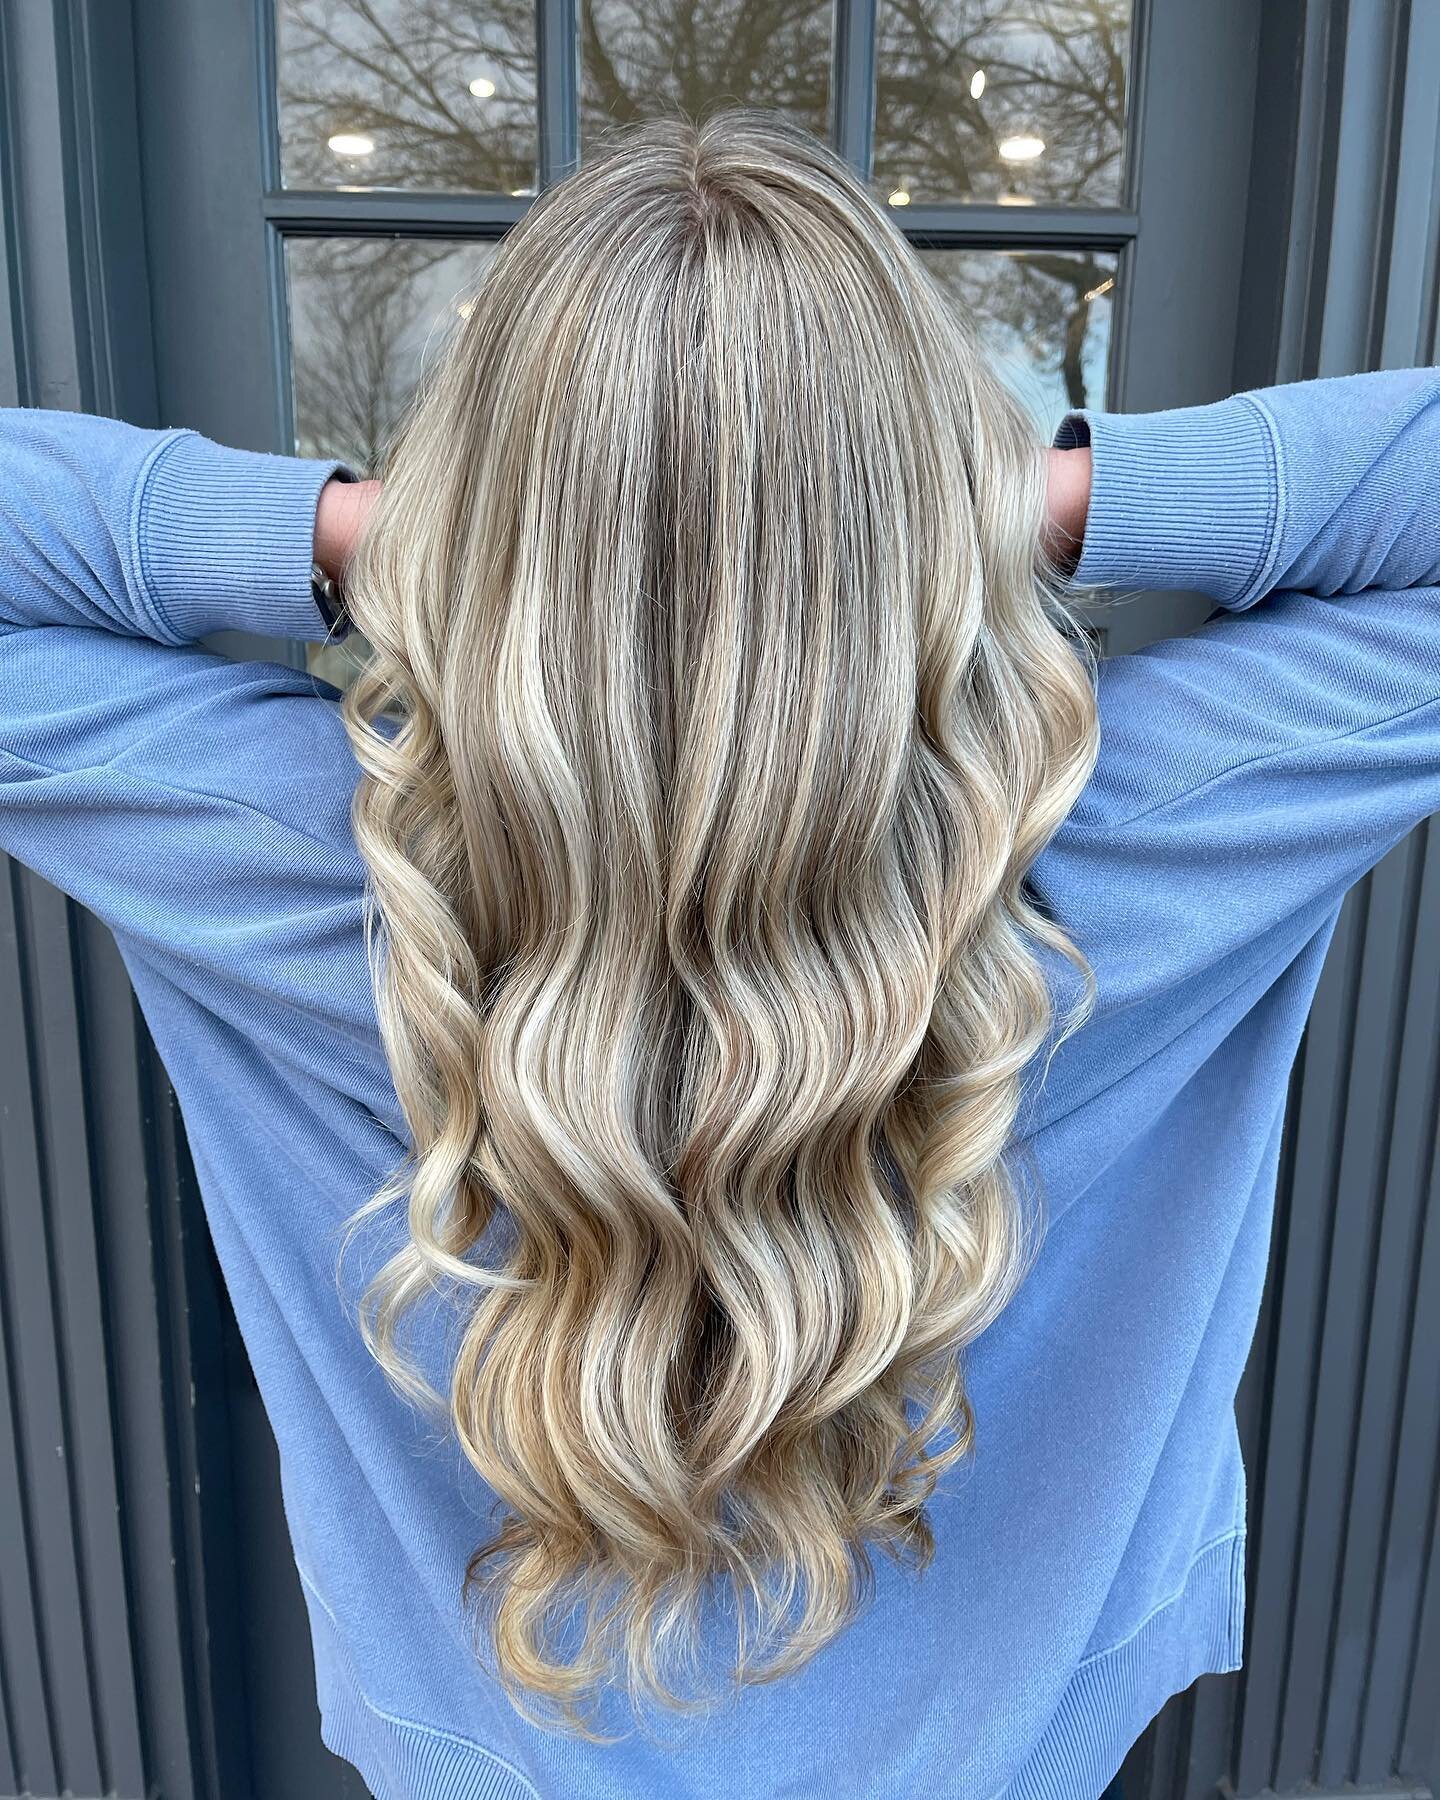 Winter girly 🤍❄️
-
By Teal @trends_by_teal 
-
TEXT TO BOOK 302-379-7876
-

#teasesalonde #delawaresalon #delawarehairstylist #delawarehair #delawarestylist #delawarehairsalon #delawaresalon #behindthechair #modernsalon #americansalon #redkensalon #h